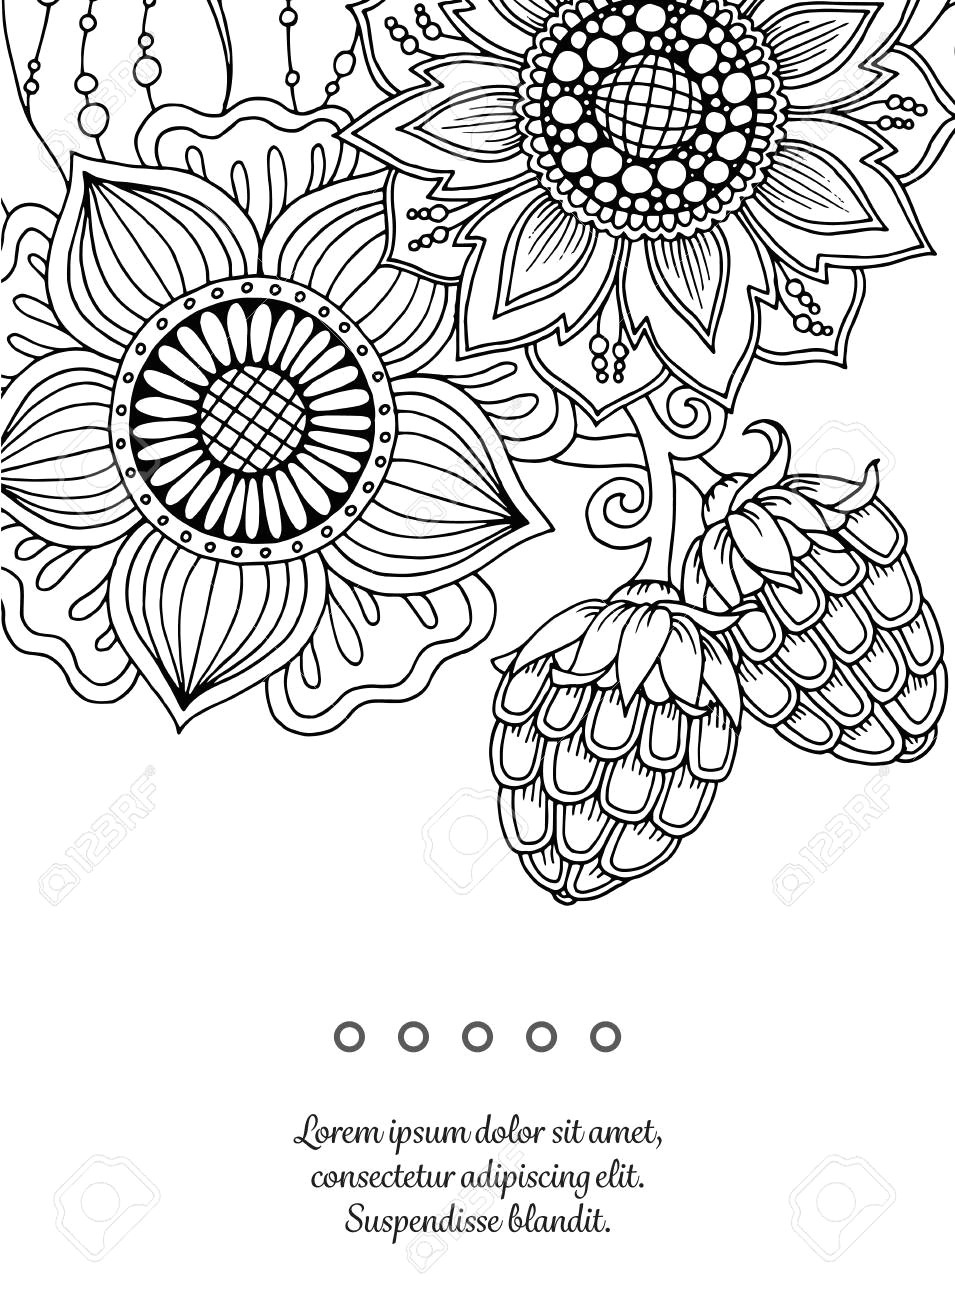 Drawings Of Flowers Abstract Floral Card Hand Drawn Artwork with Abstract Flowers Background